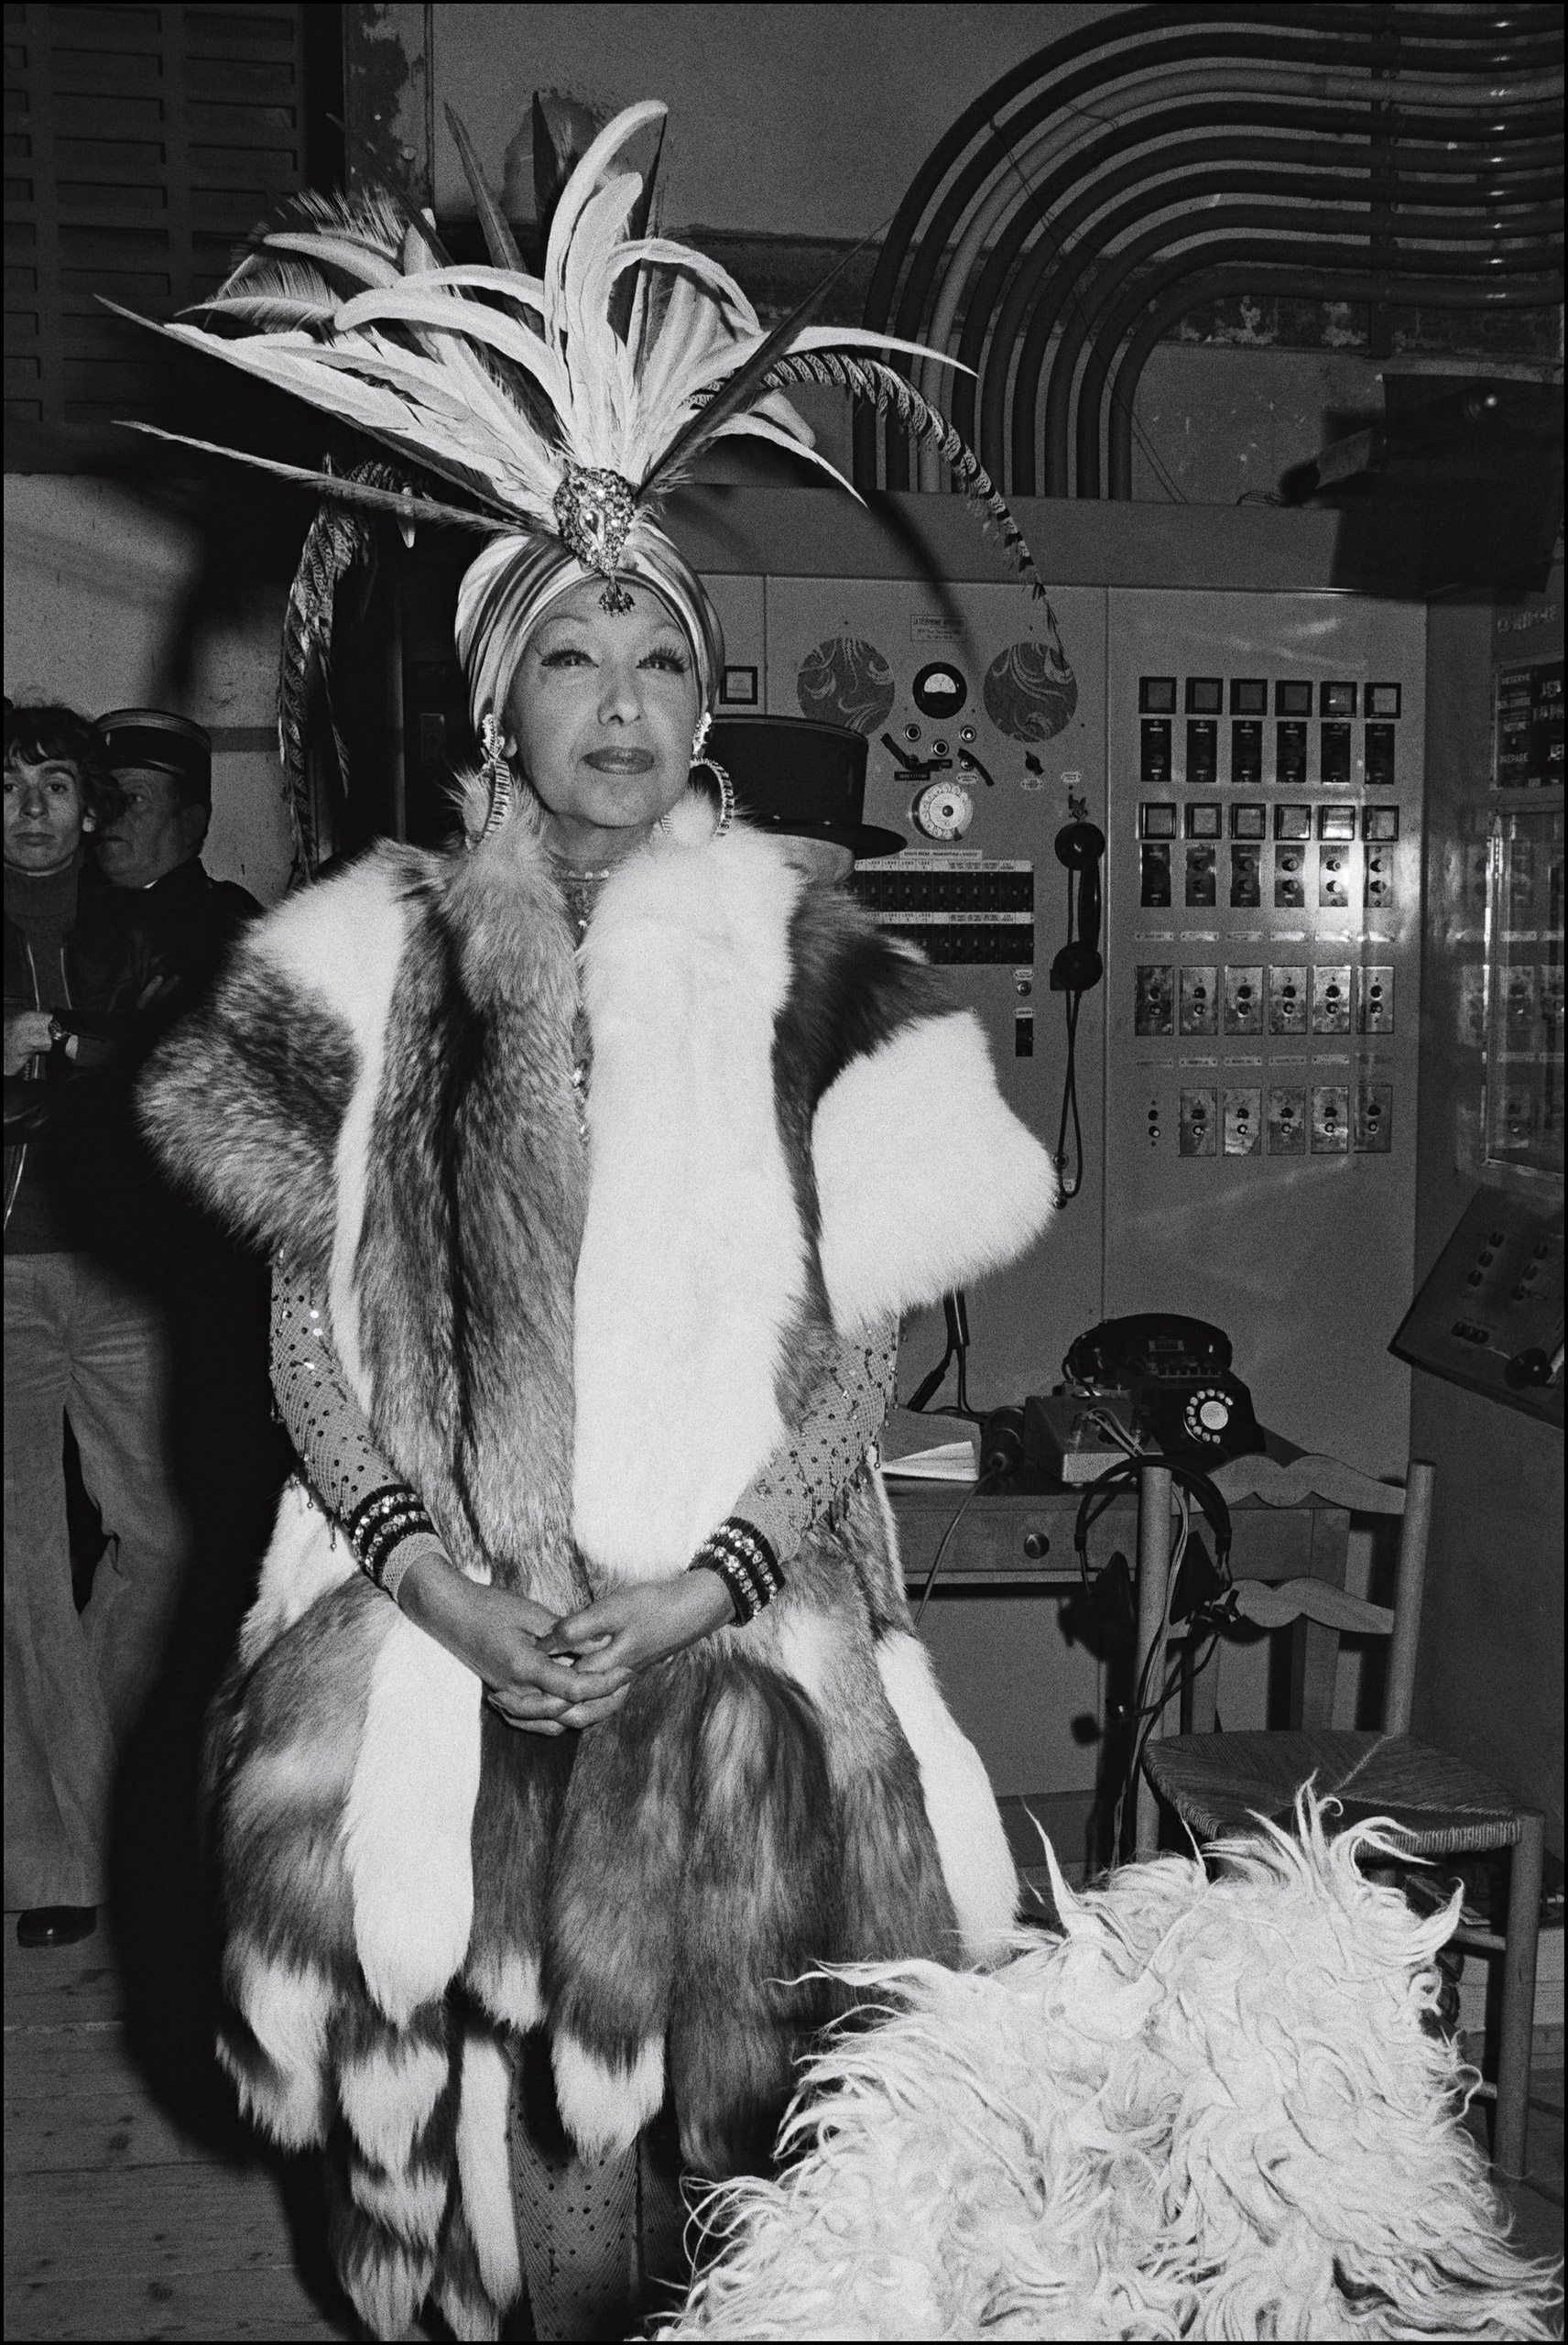 Josephine Baker at a gala organized by the Baroness de Rothschild for the restoration of Versailles castle In France on Nov. 28, 1973.